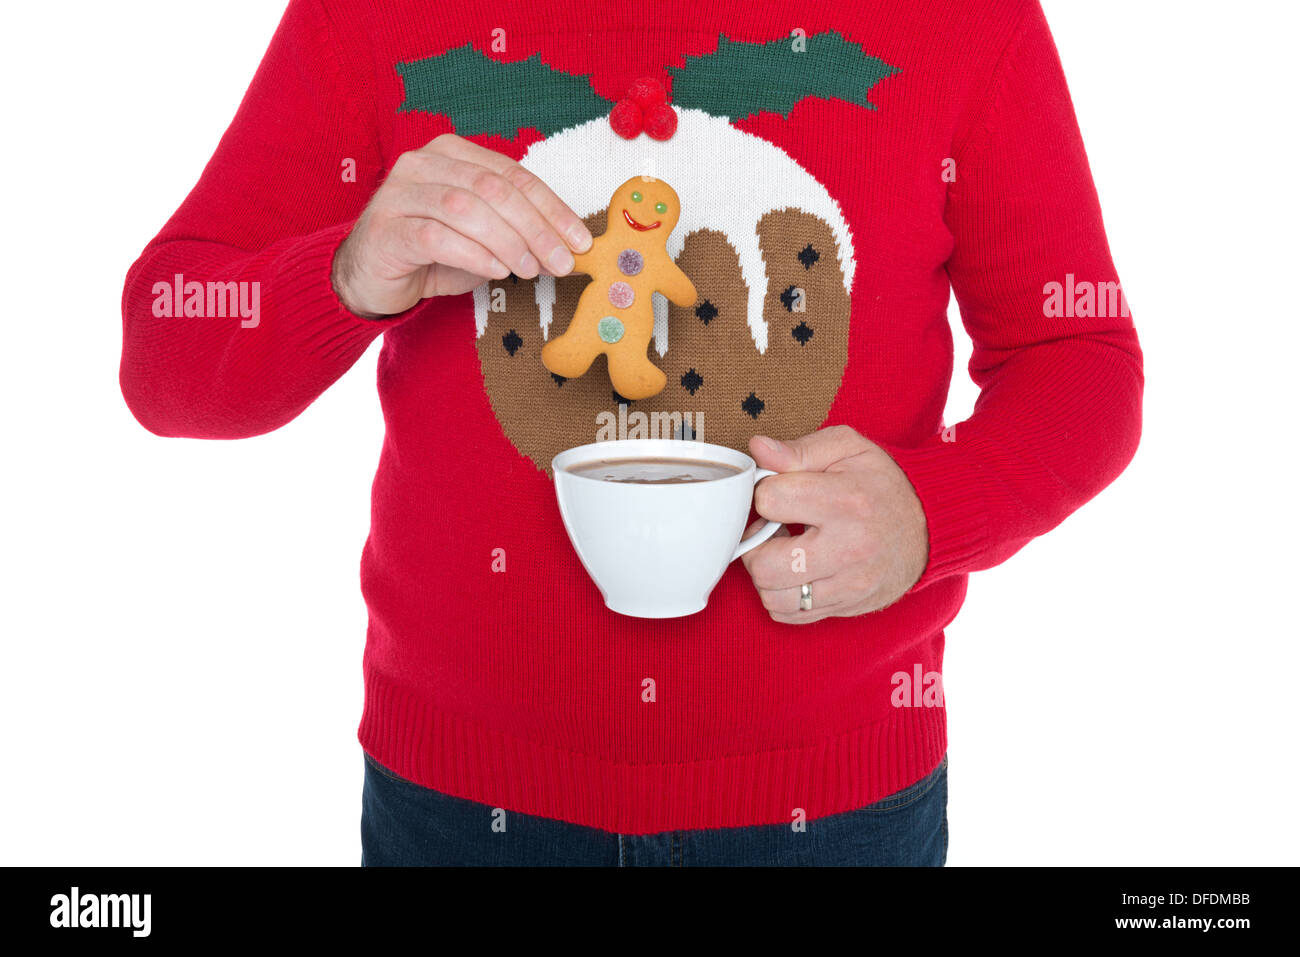 Man wearing a Christmas jumper about to dip a gingerbread man in a cup of hot chocolate, isolated against a white background. Stock Photo